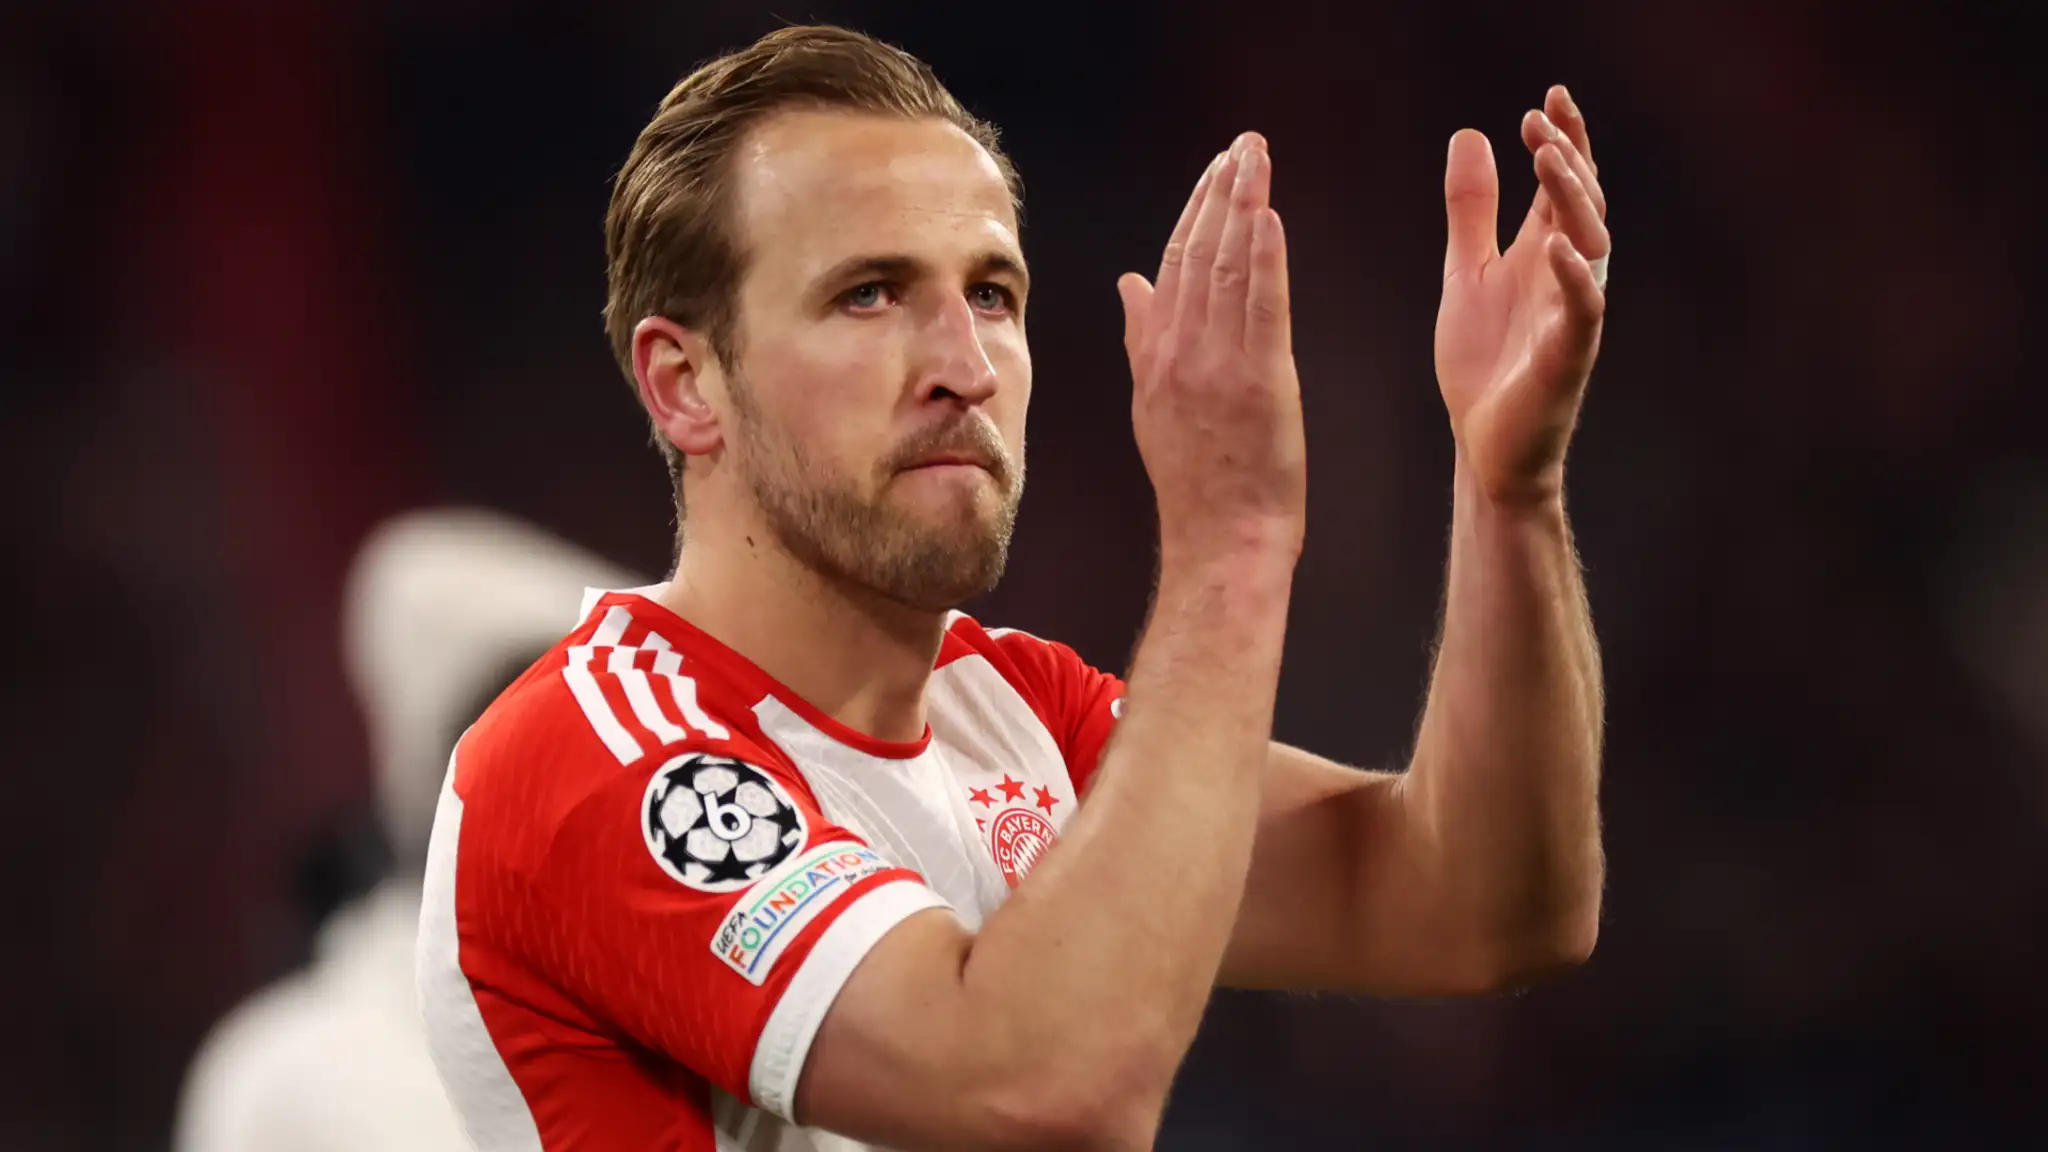 Harry Kane posts adorable family snap as he thanks Bayern Munich fans for making him feel "at home" at Allianz Arena after sensational individual season